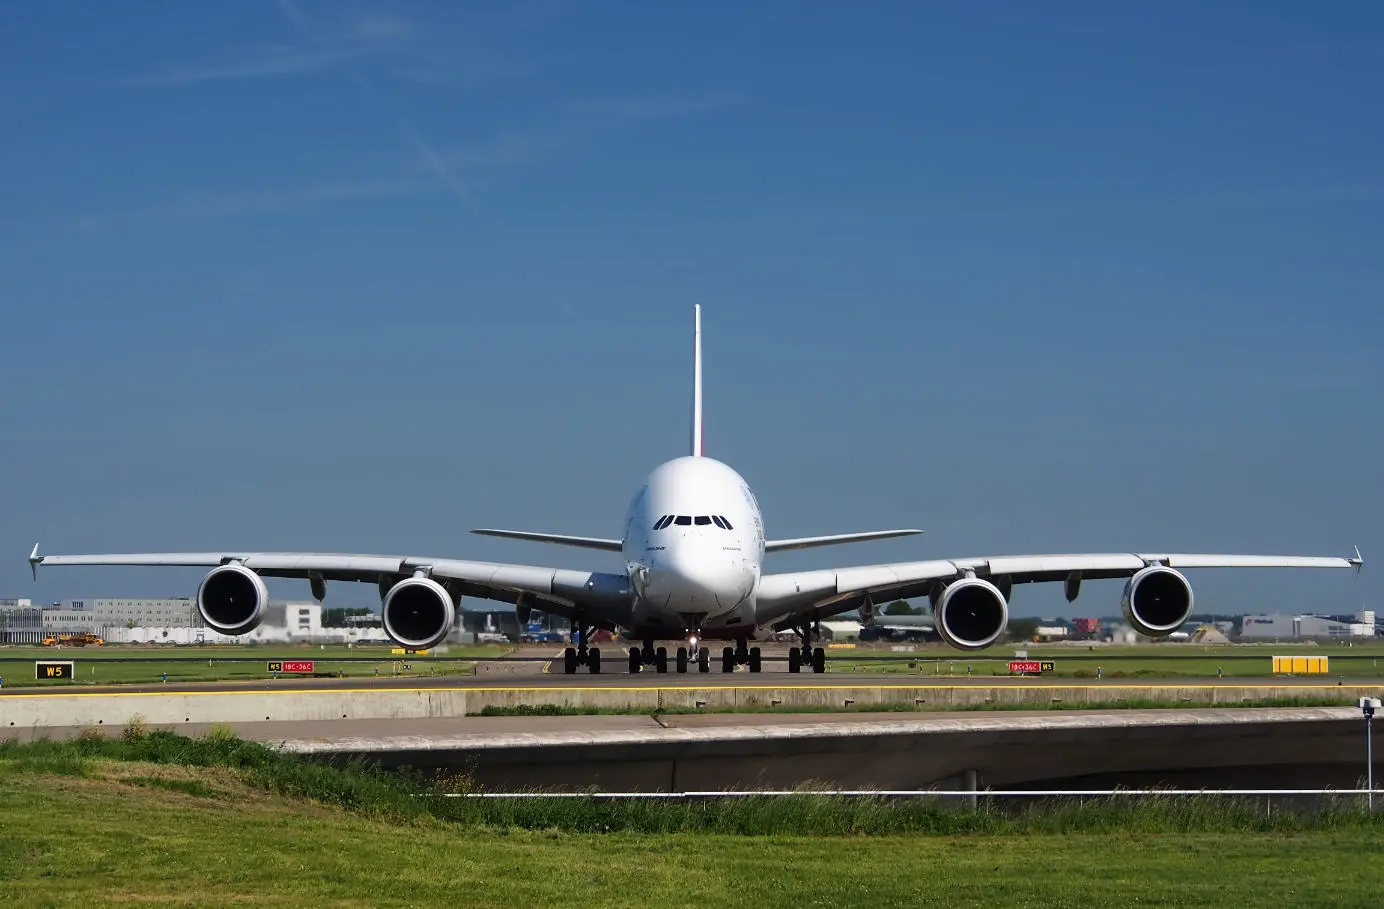 The Airbus A380 project was announced in 1990